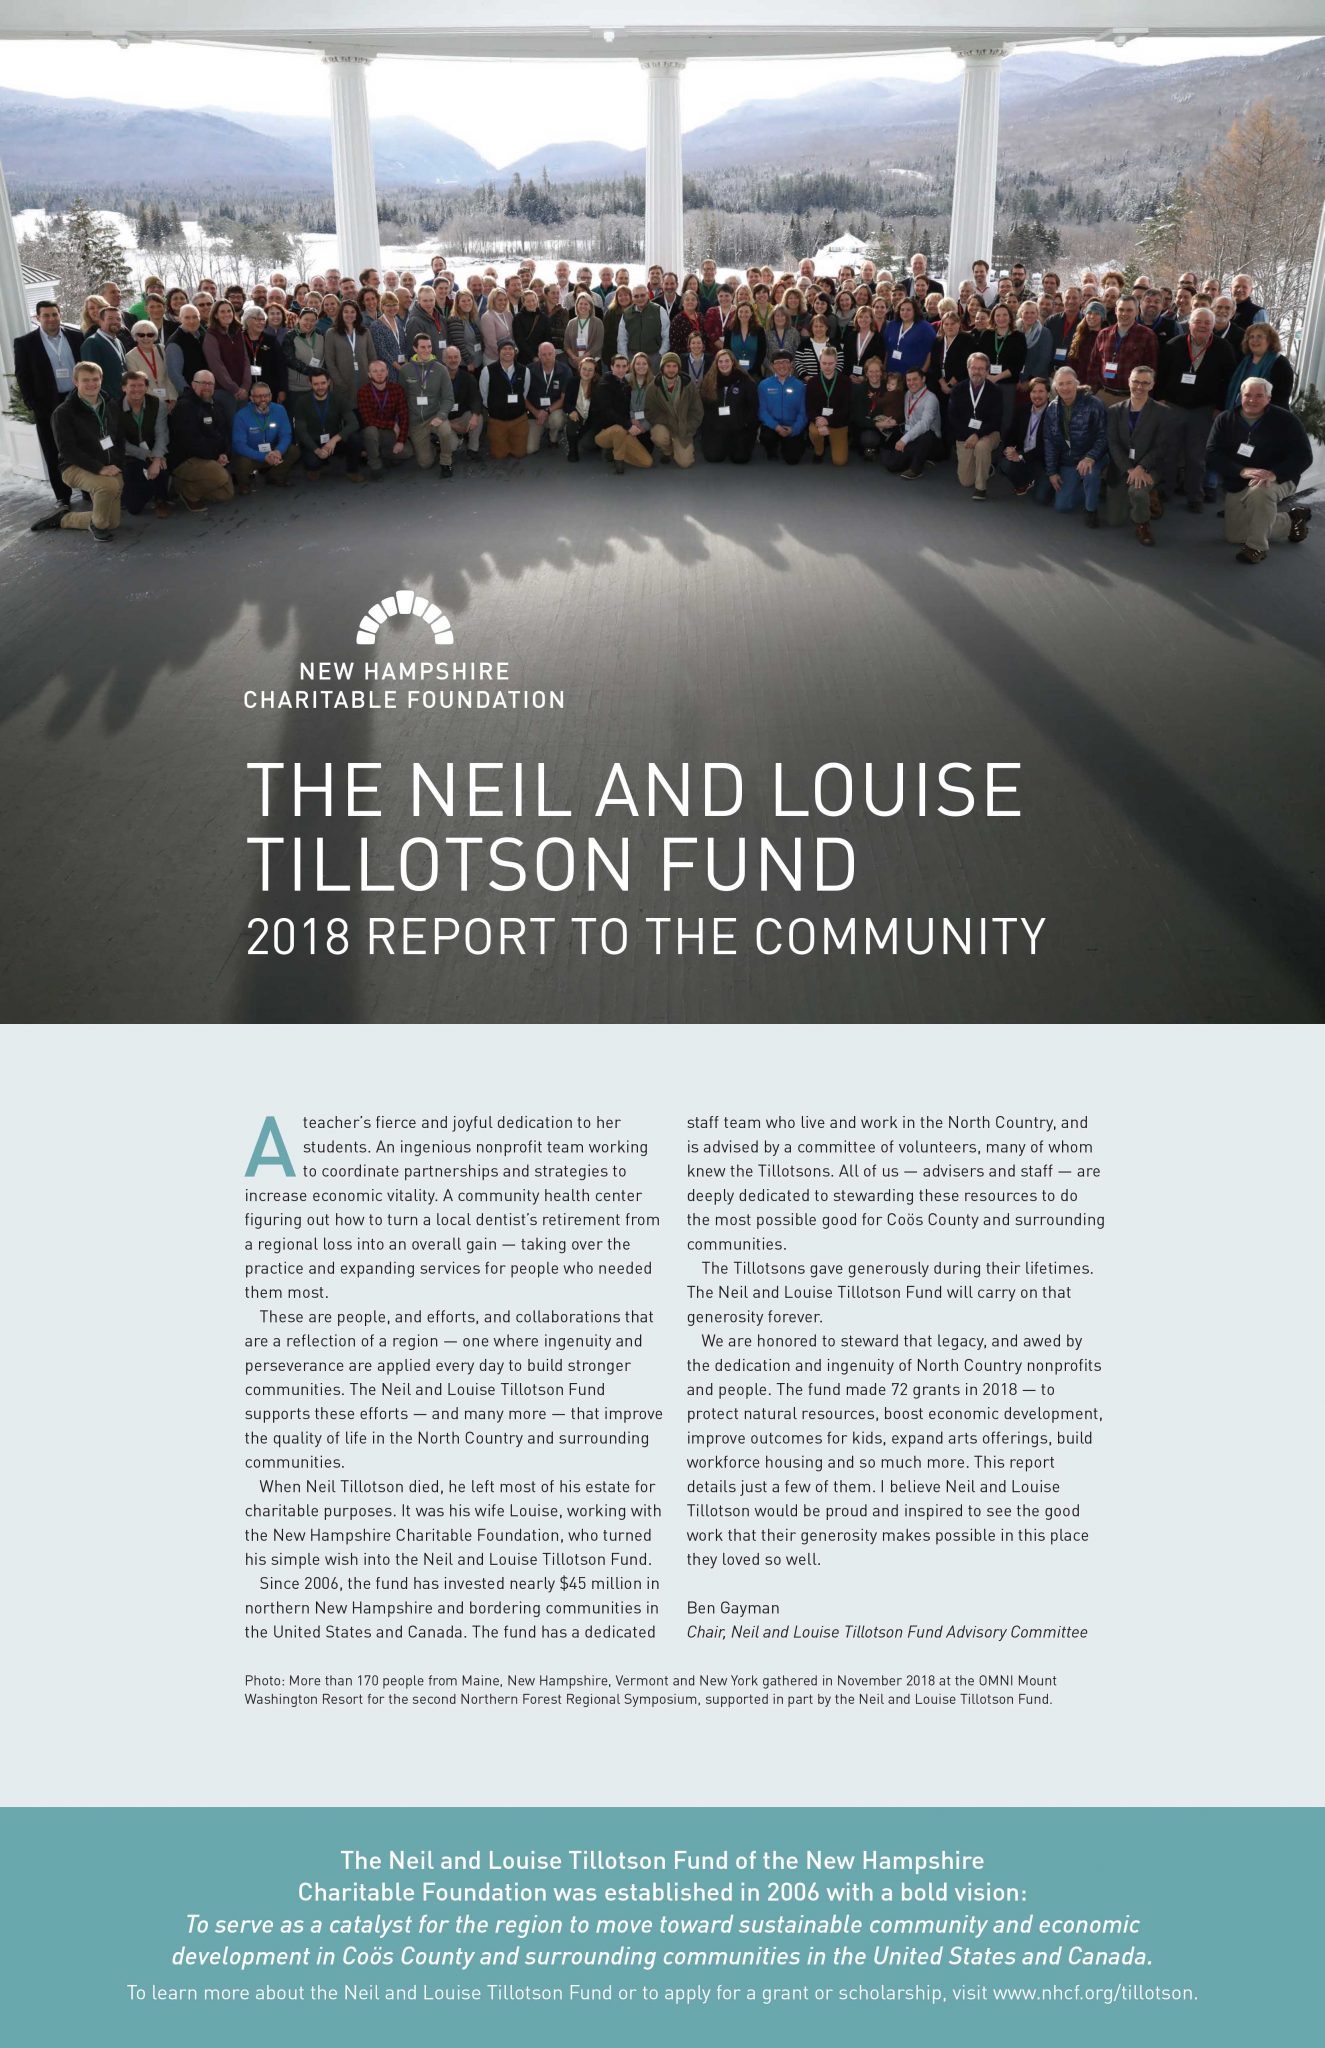 The Neil and Louise Tillotson 2018 Report to the Community